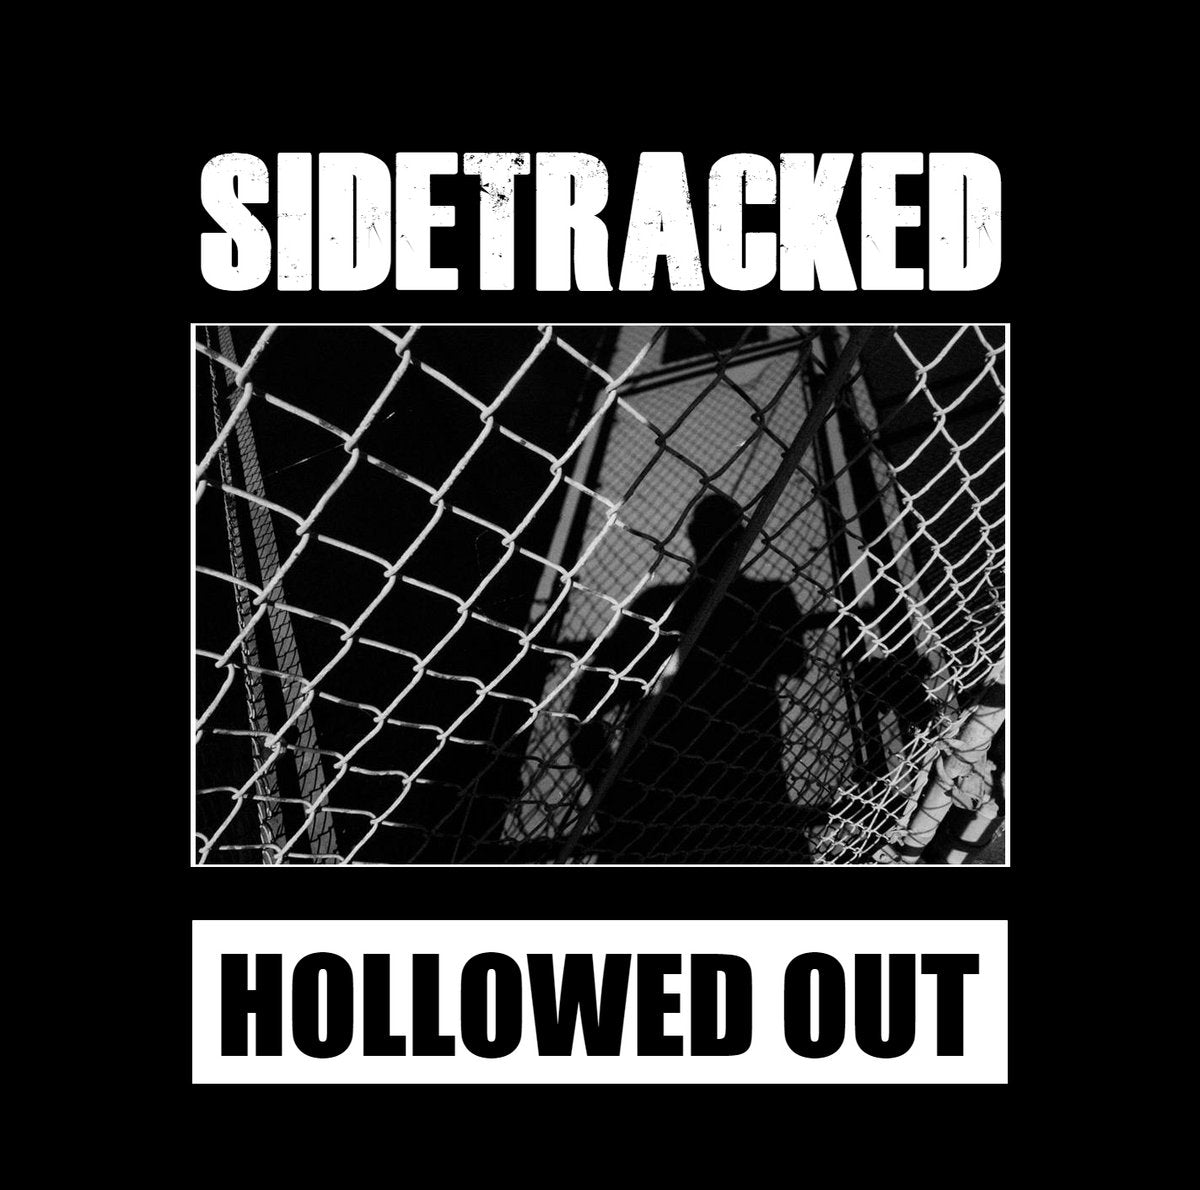 Sidetracked - "Hollowed Out" 12-Inch